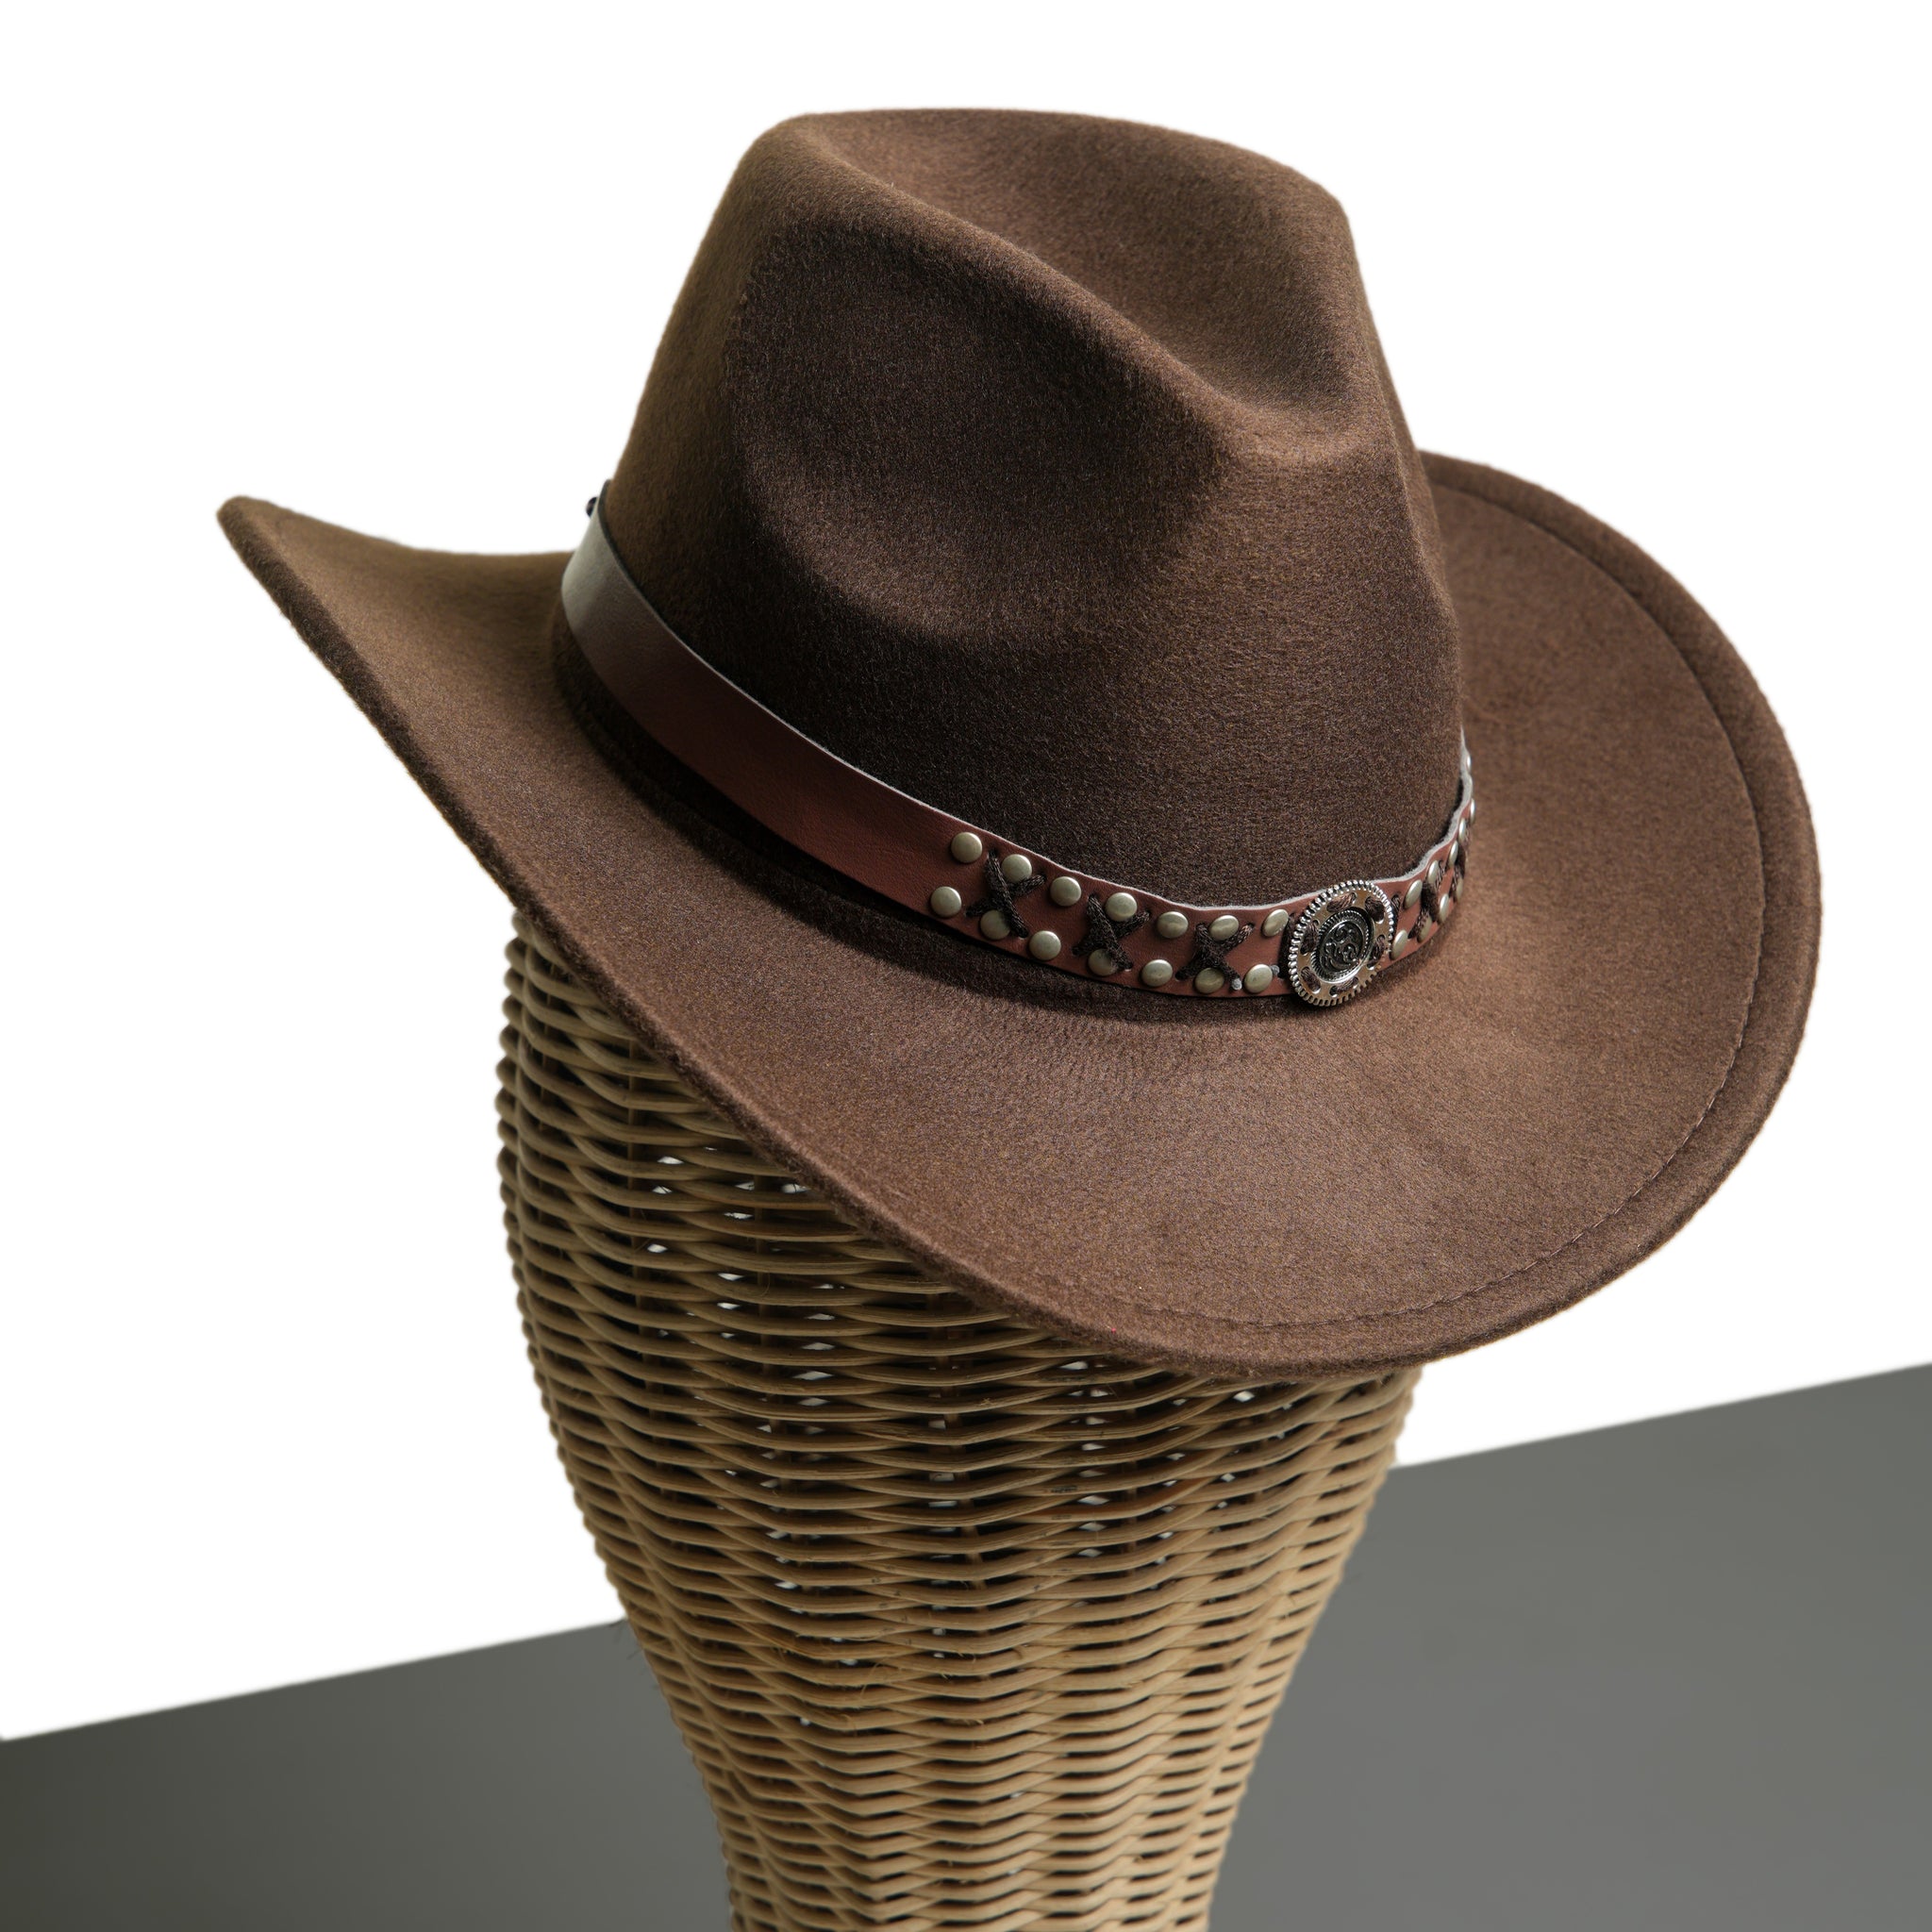 Chokore Cowboy Hat with Vegan Leather Embellished Belt (Chocolate Brown)